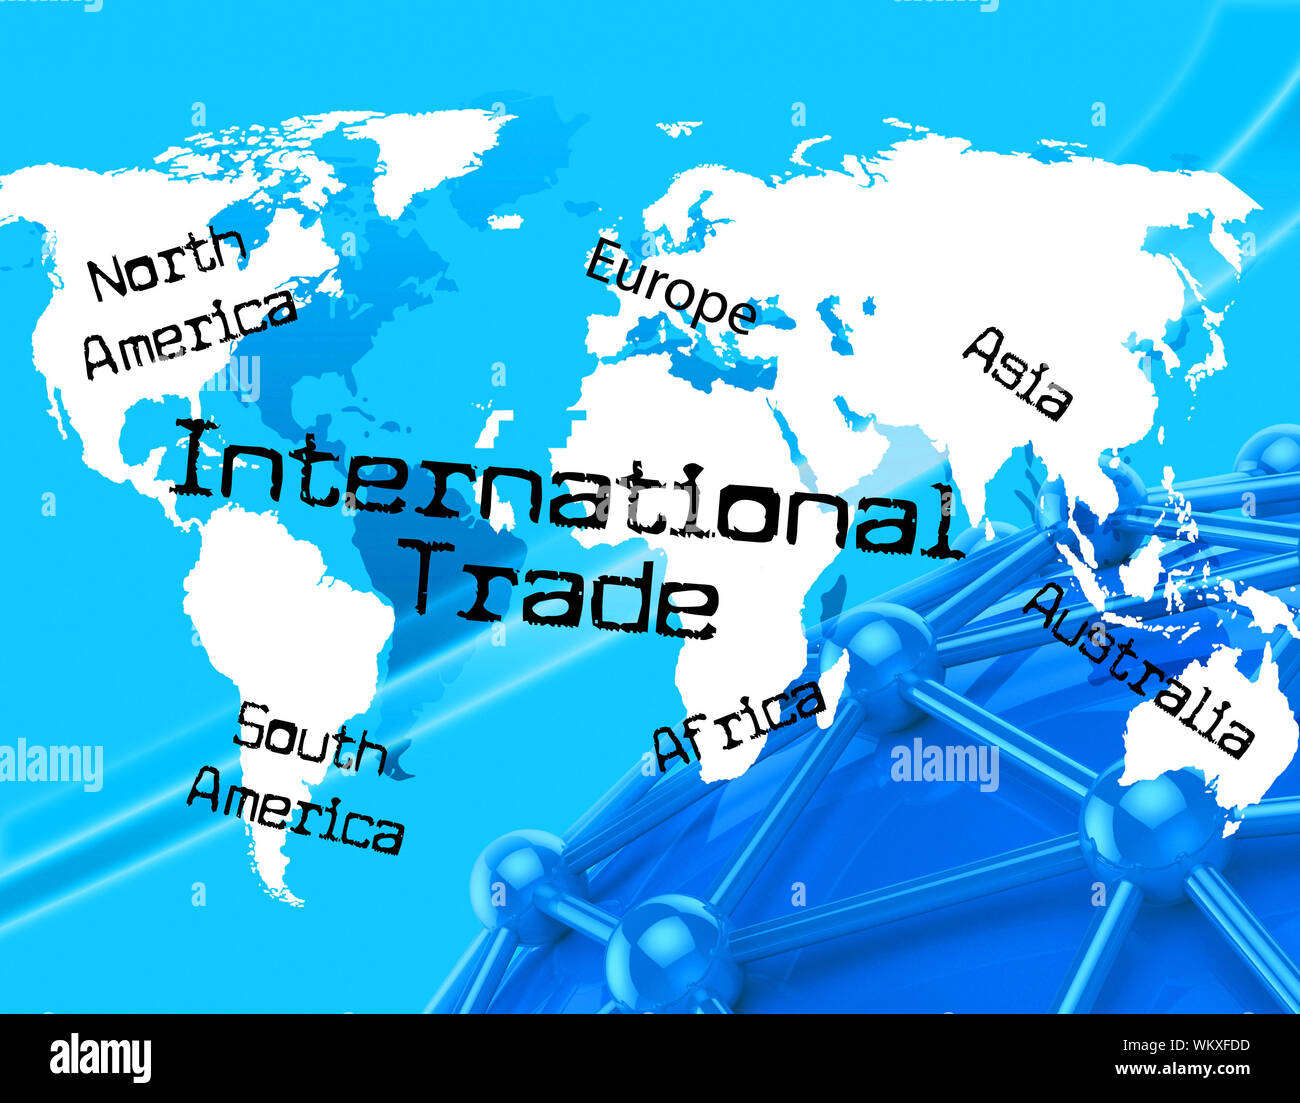 International Trade Meaning Across The Globe And Export Trading Stock Photo